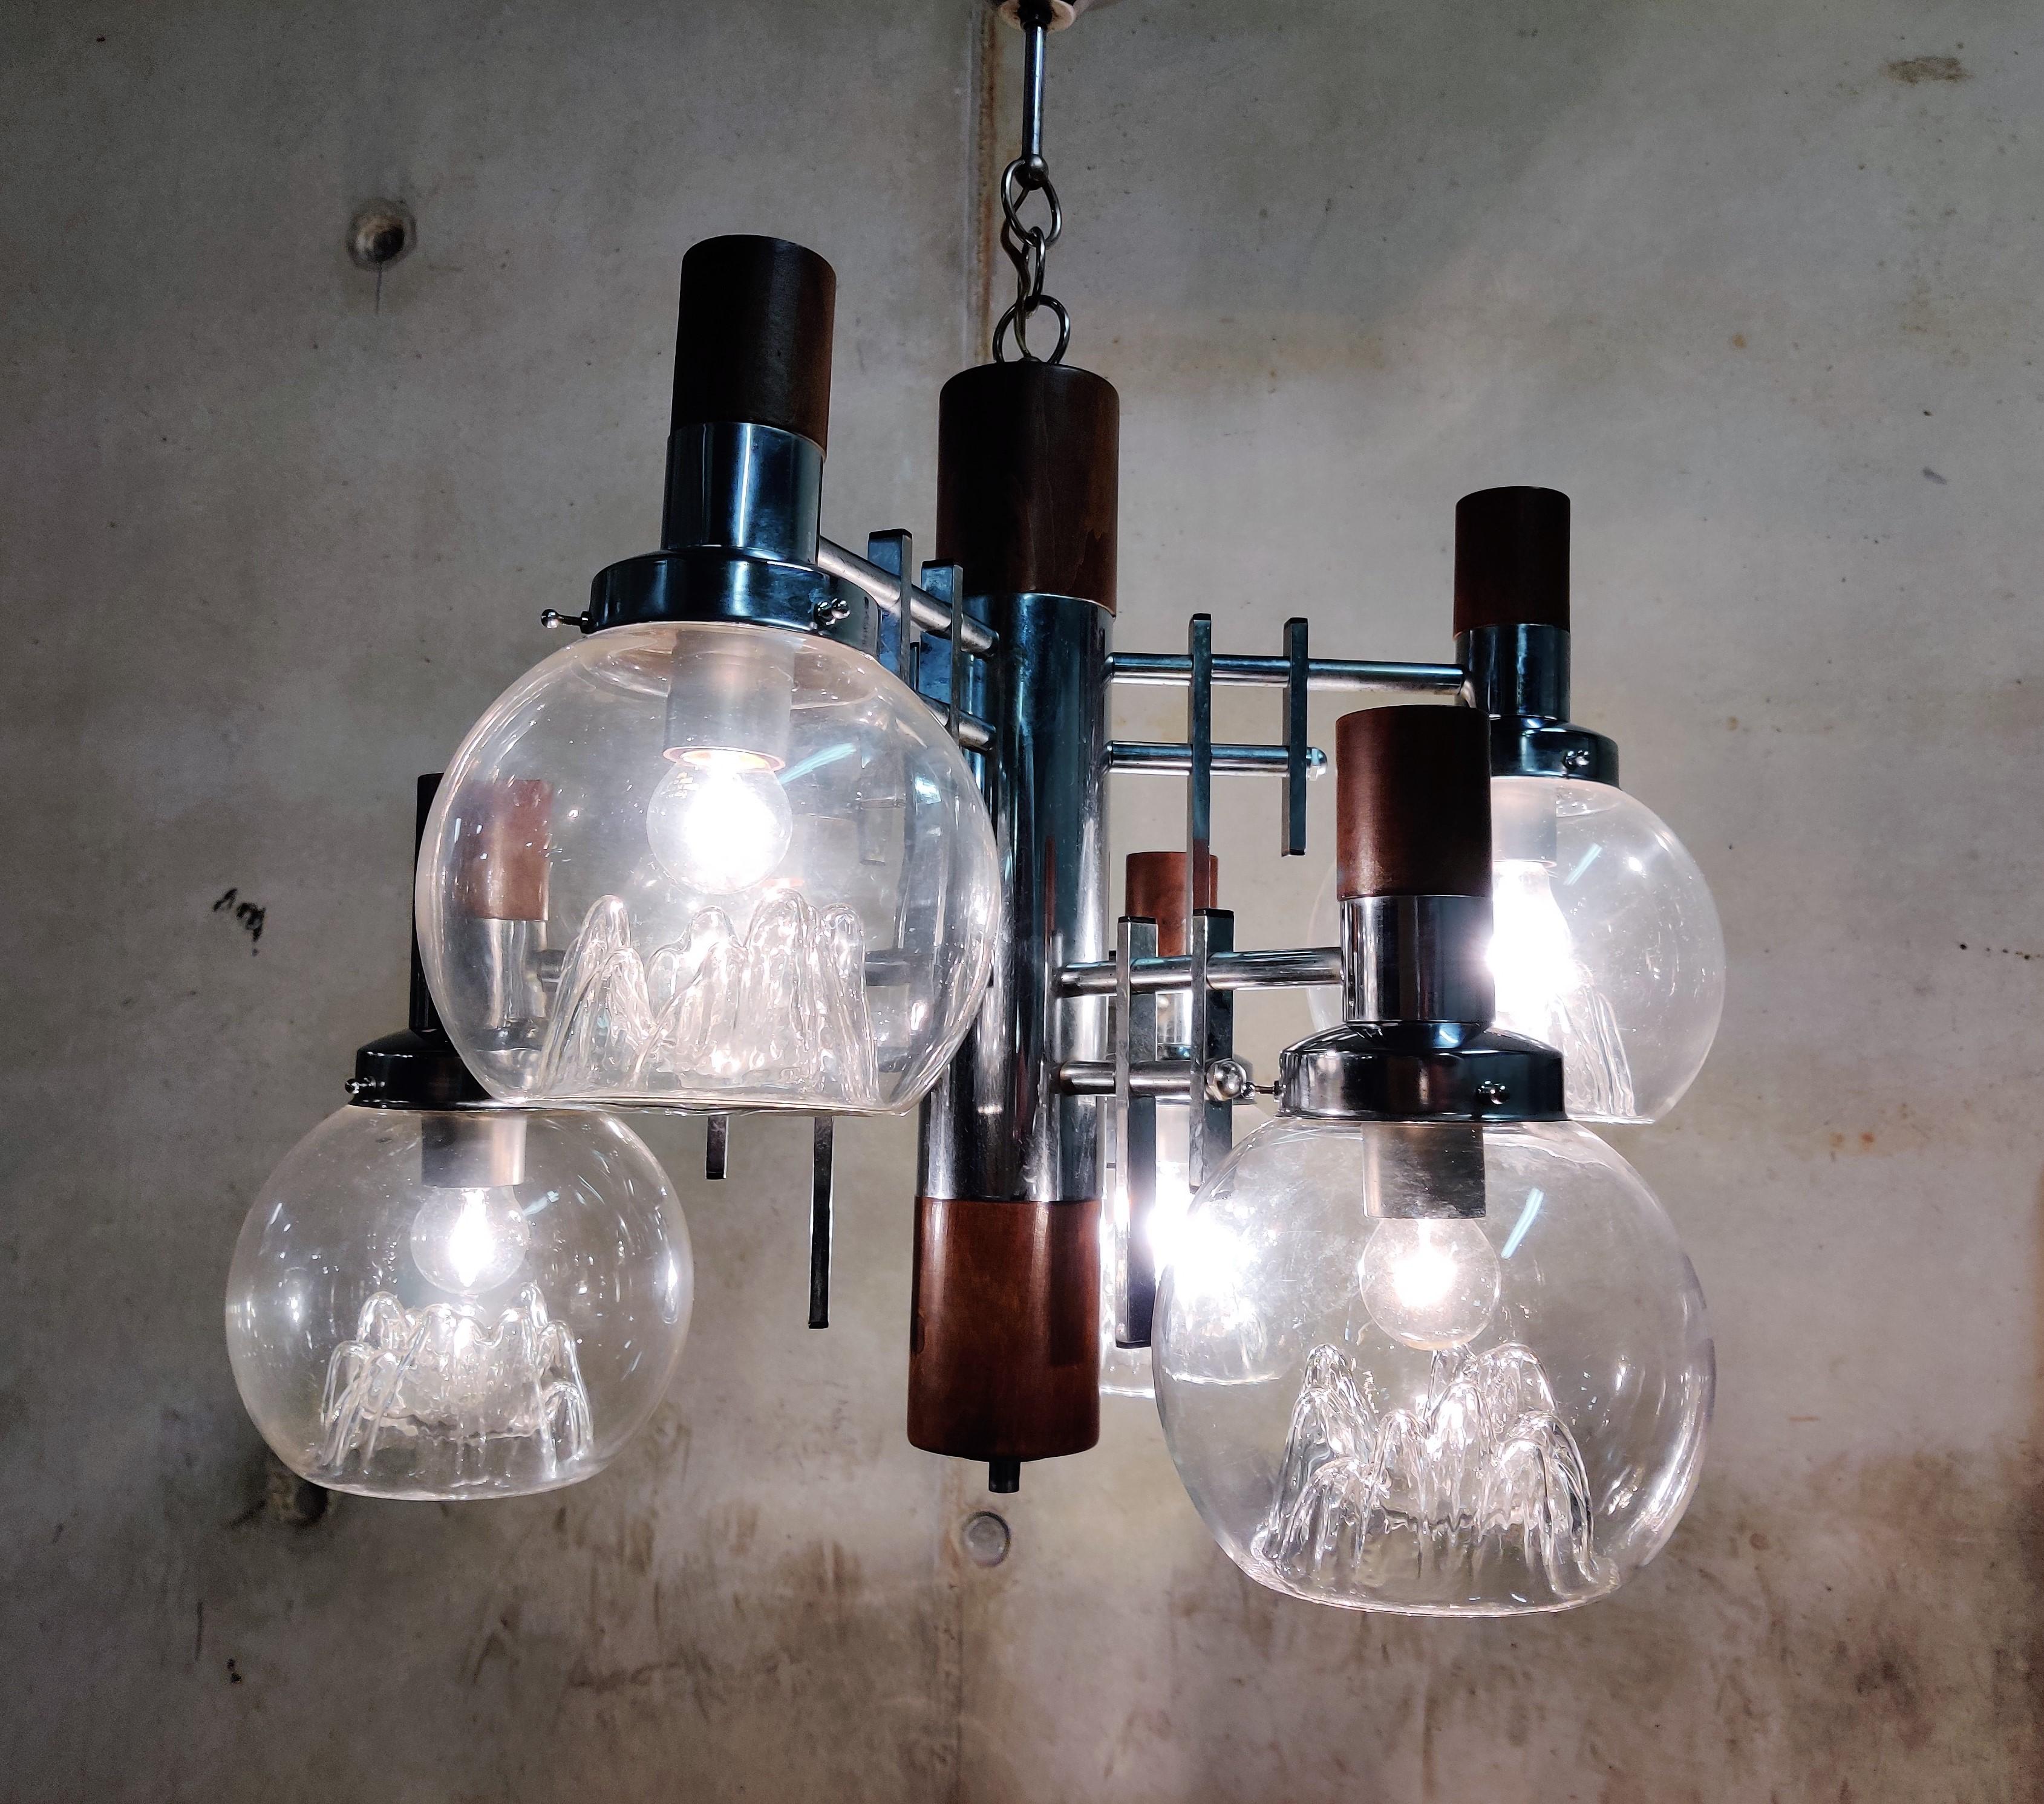 Midcentury chrome and blown glass chandelier by Mazzega.

The unique hand blown glass globes create a beautiful light effect.

Tested and ready to be used with eight E26/E27 light bulbs.

Light patina.

1970s - Italy

Dimensions:
Height